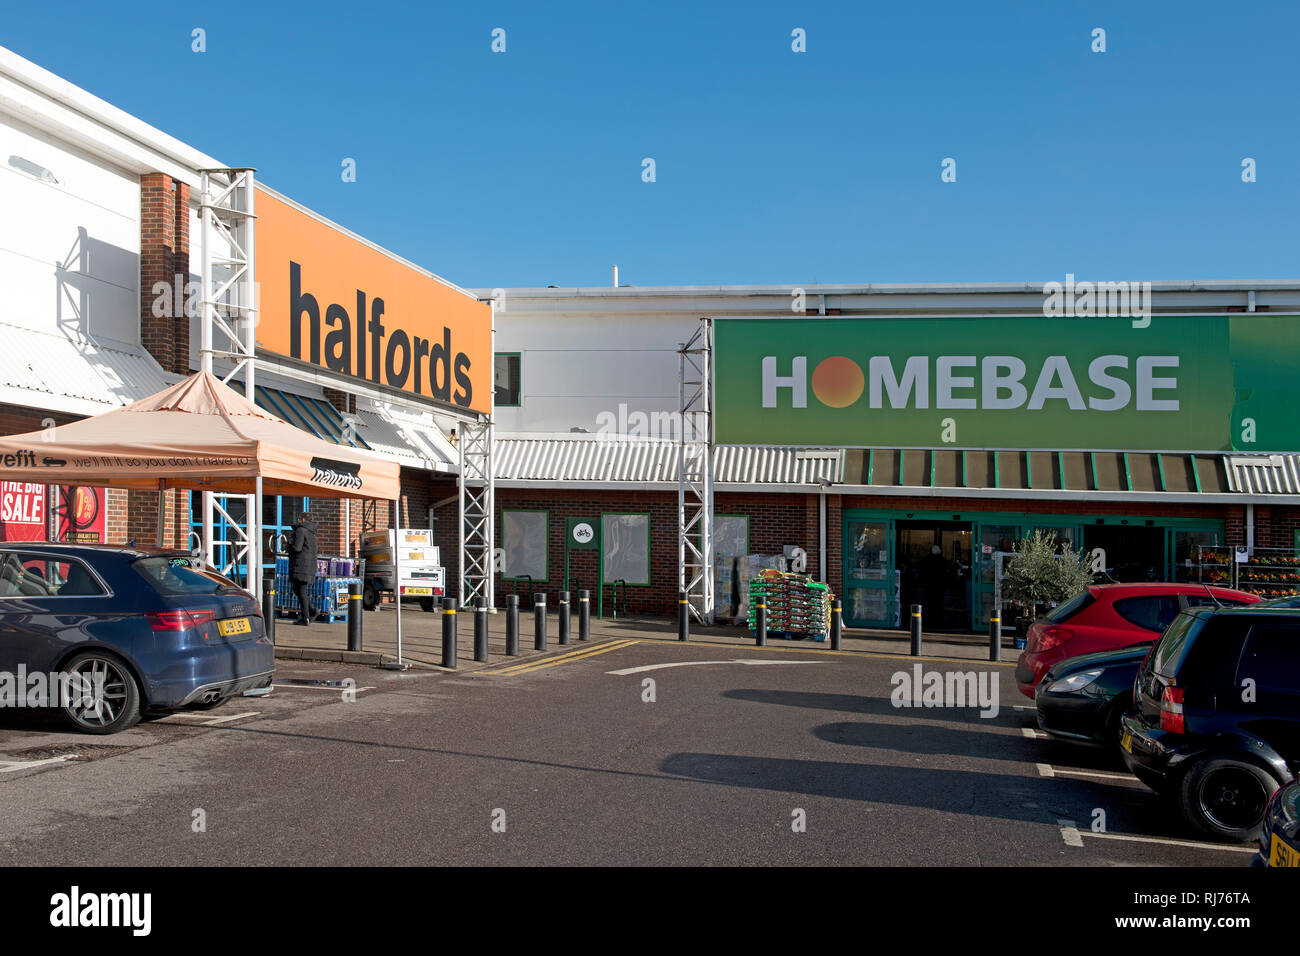 A Halfords store in Otford, Kent, selling autocare and cycling supplies Next to it is a DIY outlet selling home improvement supplies Stock Photo